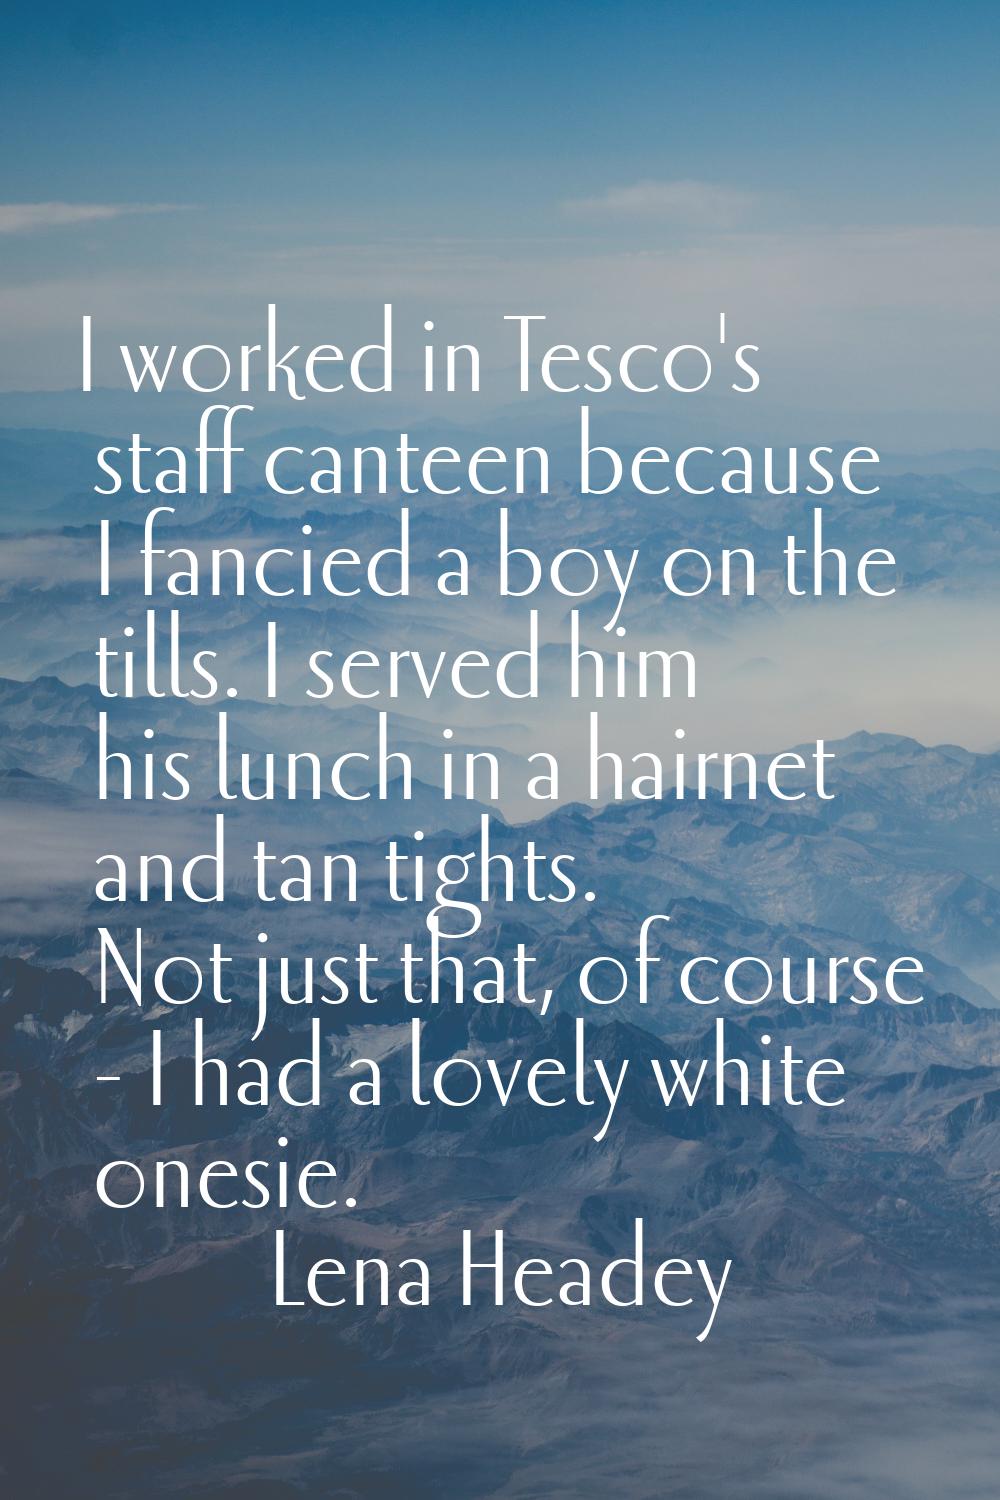 I worked in Tesco's staff canteen because I fancied a boy on the tills. I served him his lunch in a